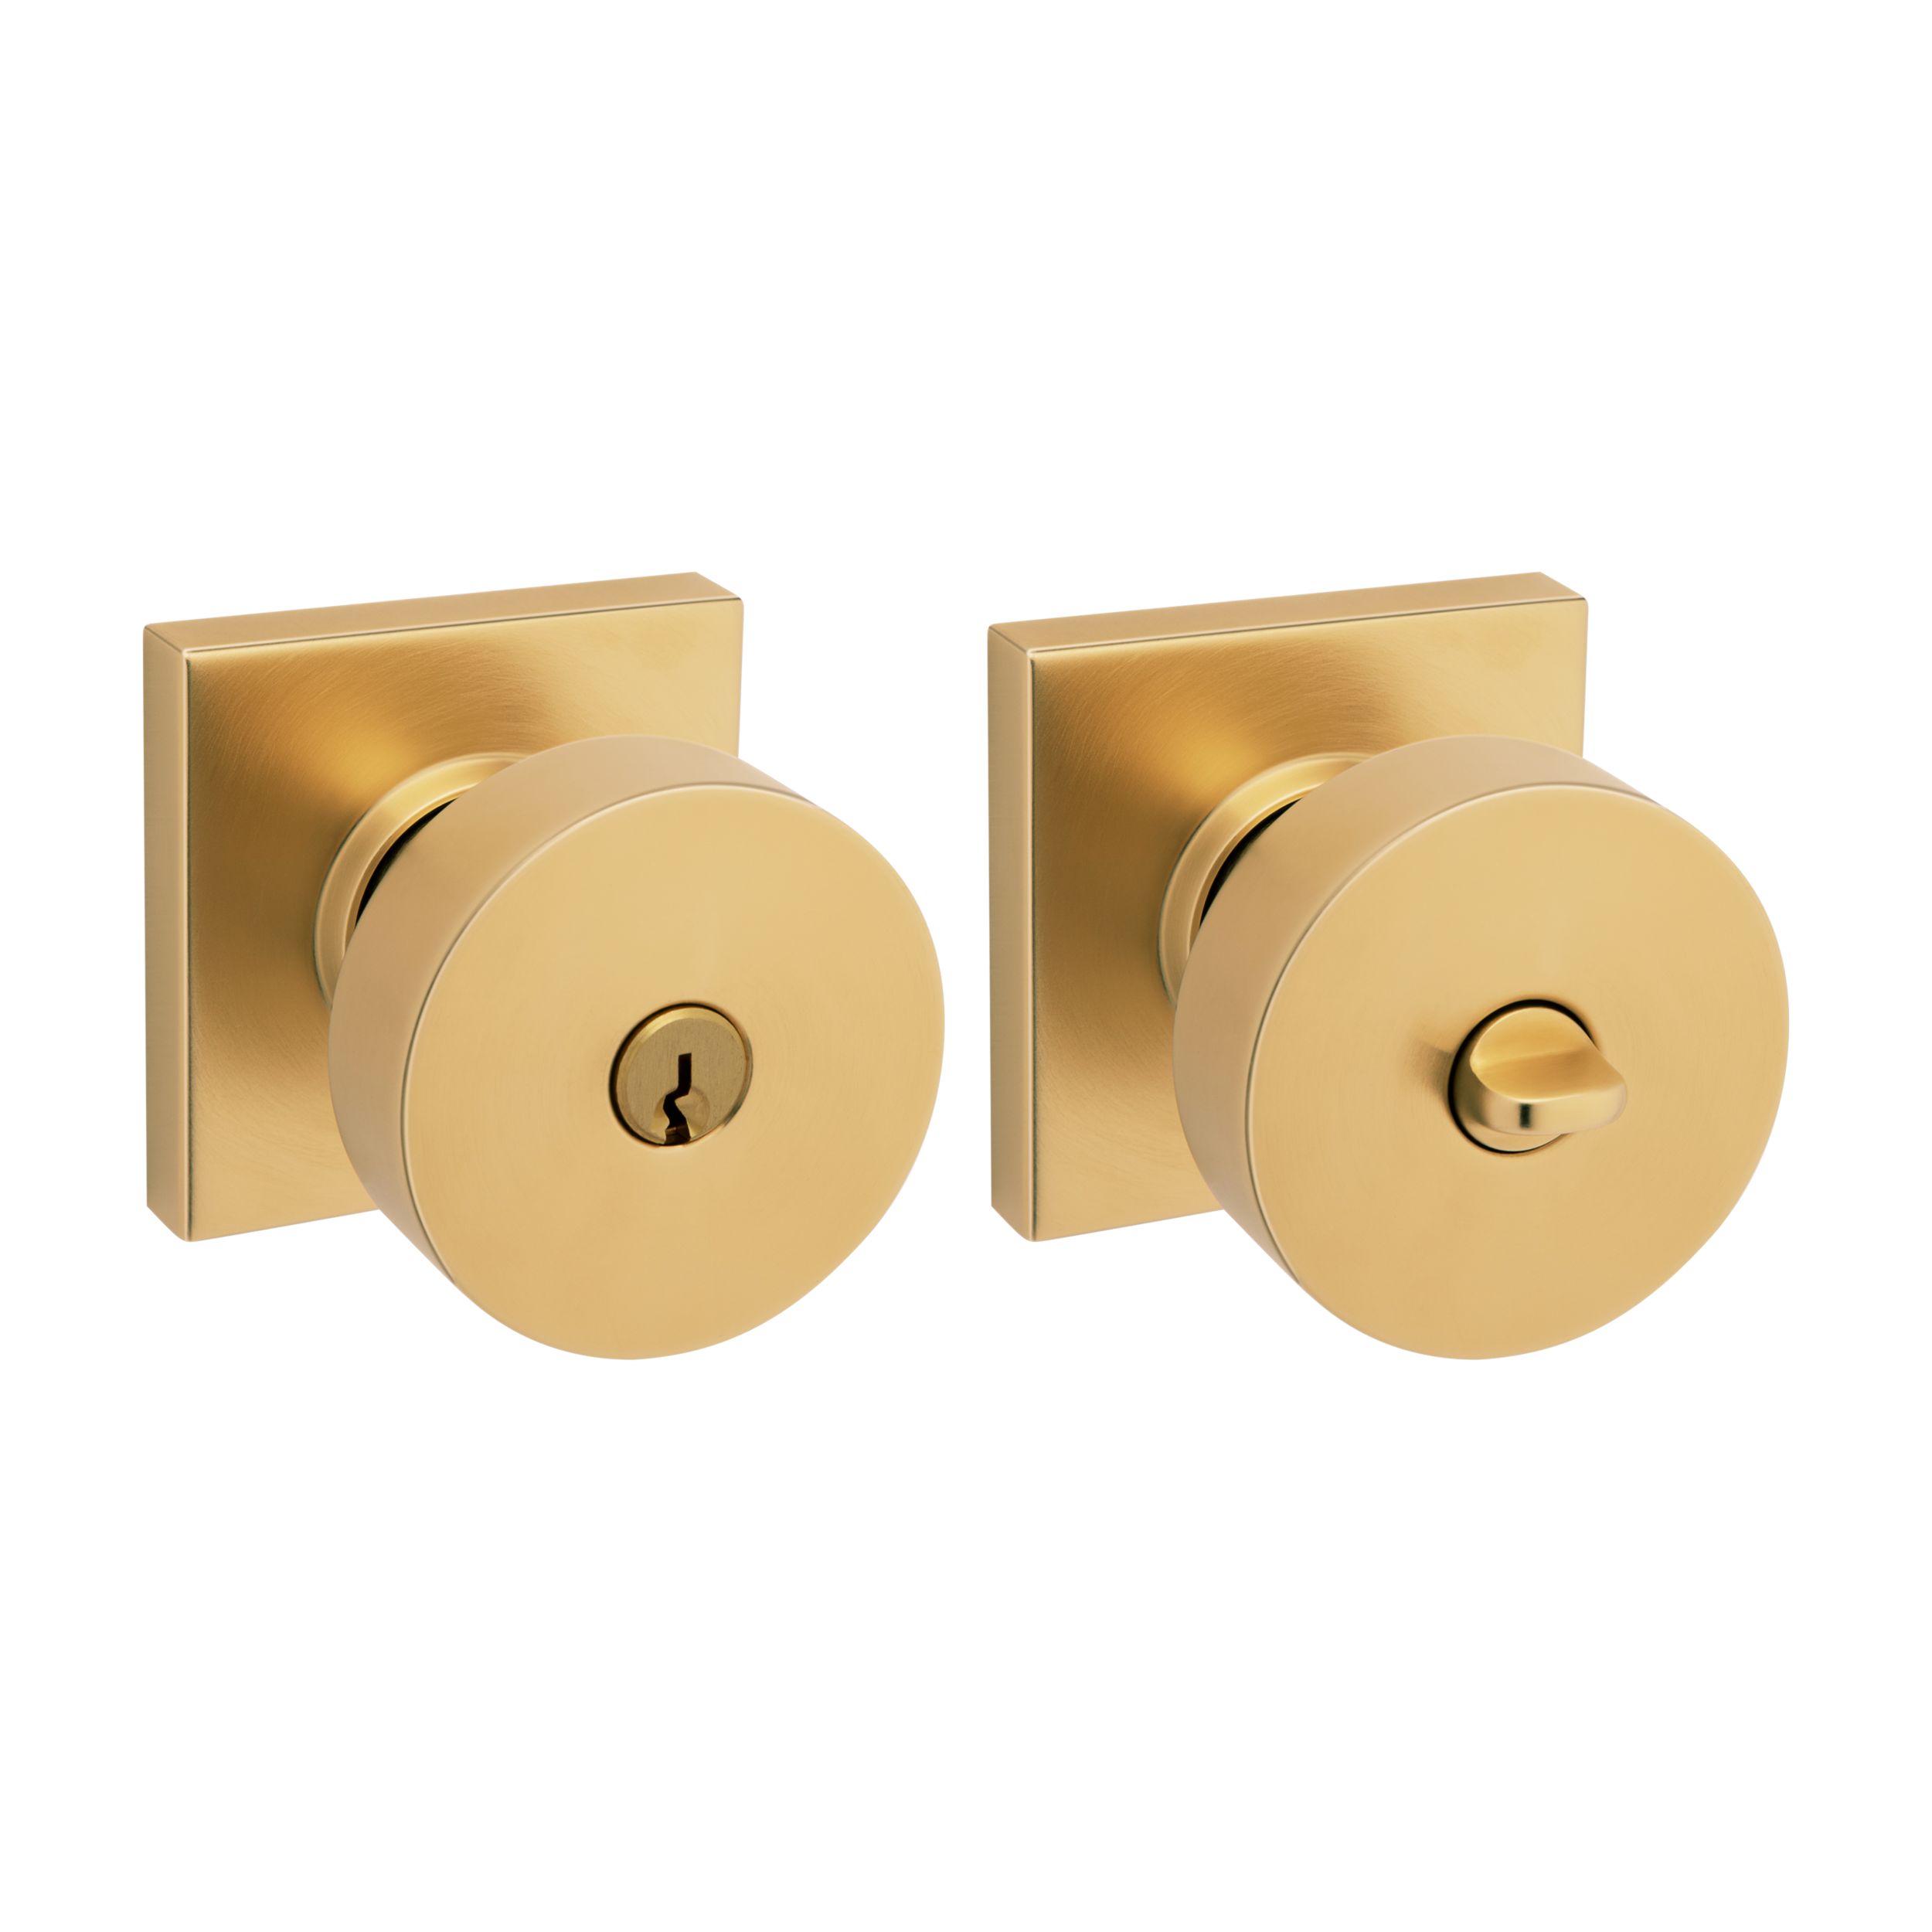 Keyed Contemporary Knob with Square Rose - Lifetime (PVD) Satin